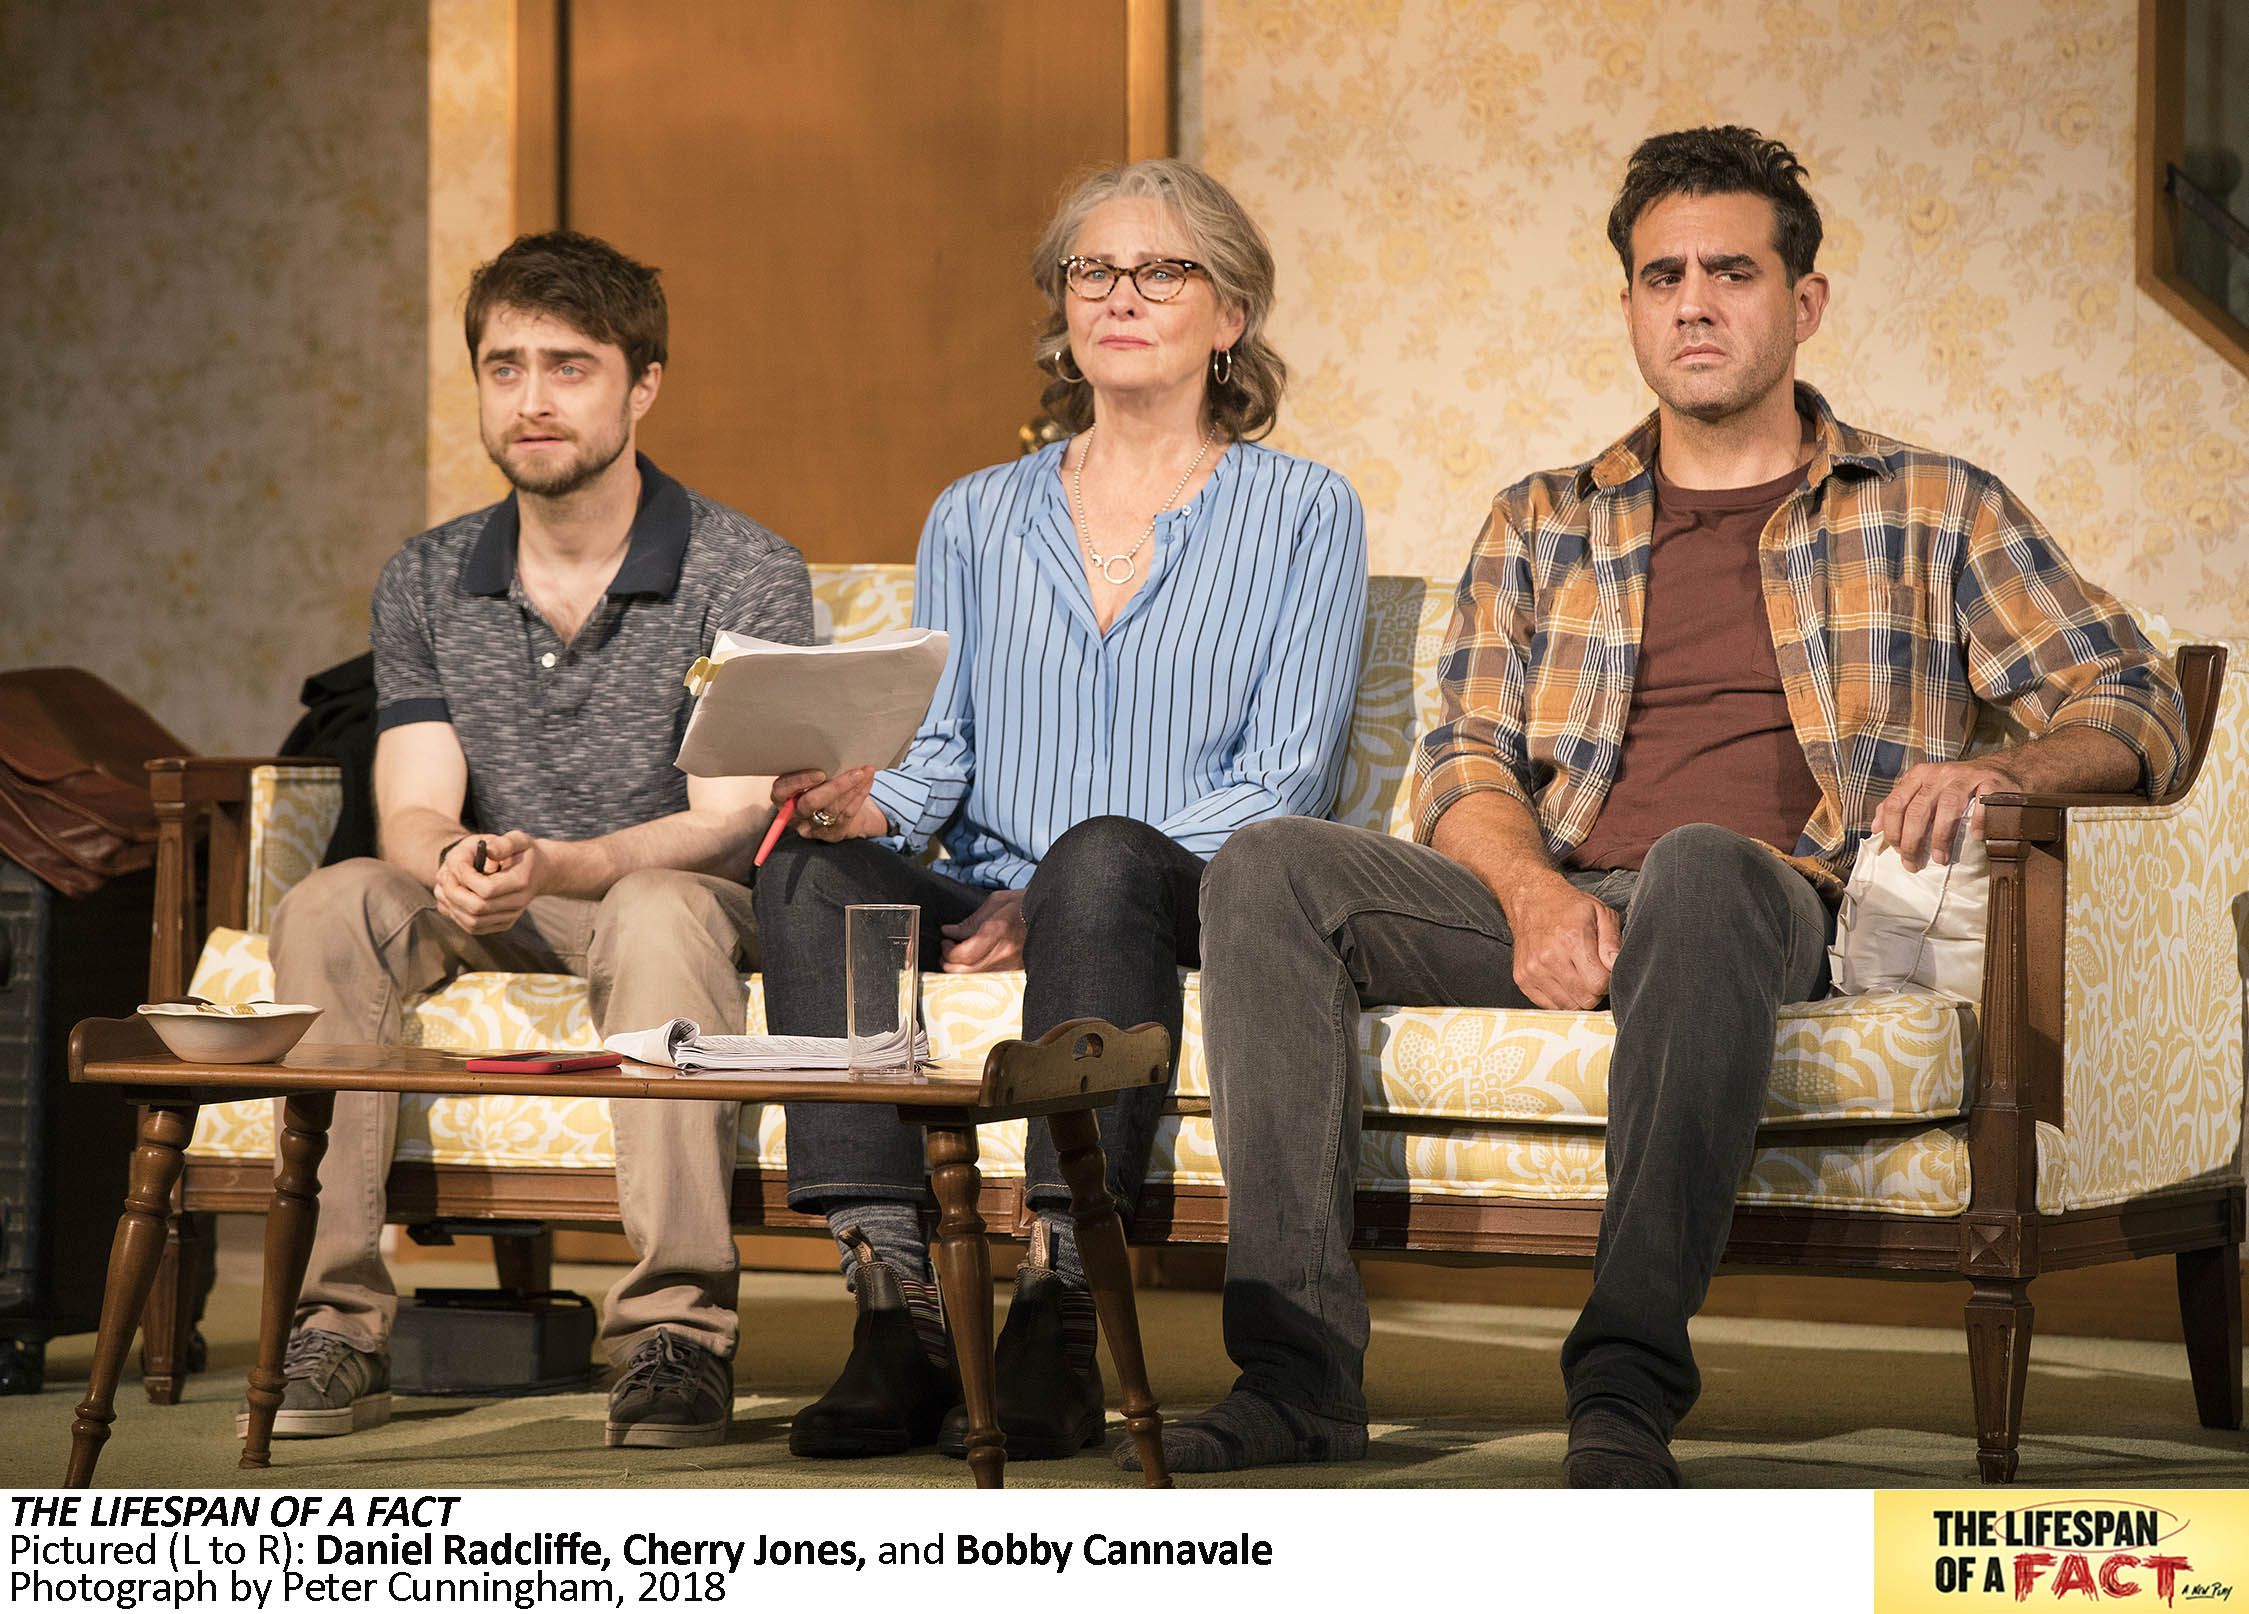 1344 The Lifespan of a Fact, Pictured L to R, Daniel Radcliffe, Cherry Jones, and Bobby Cannavale, Photograph by Peter Cunningham, 2018